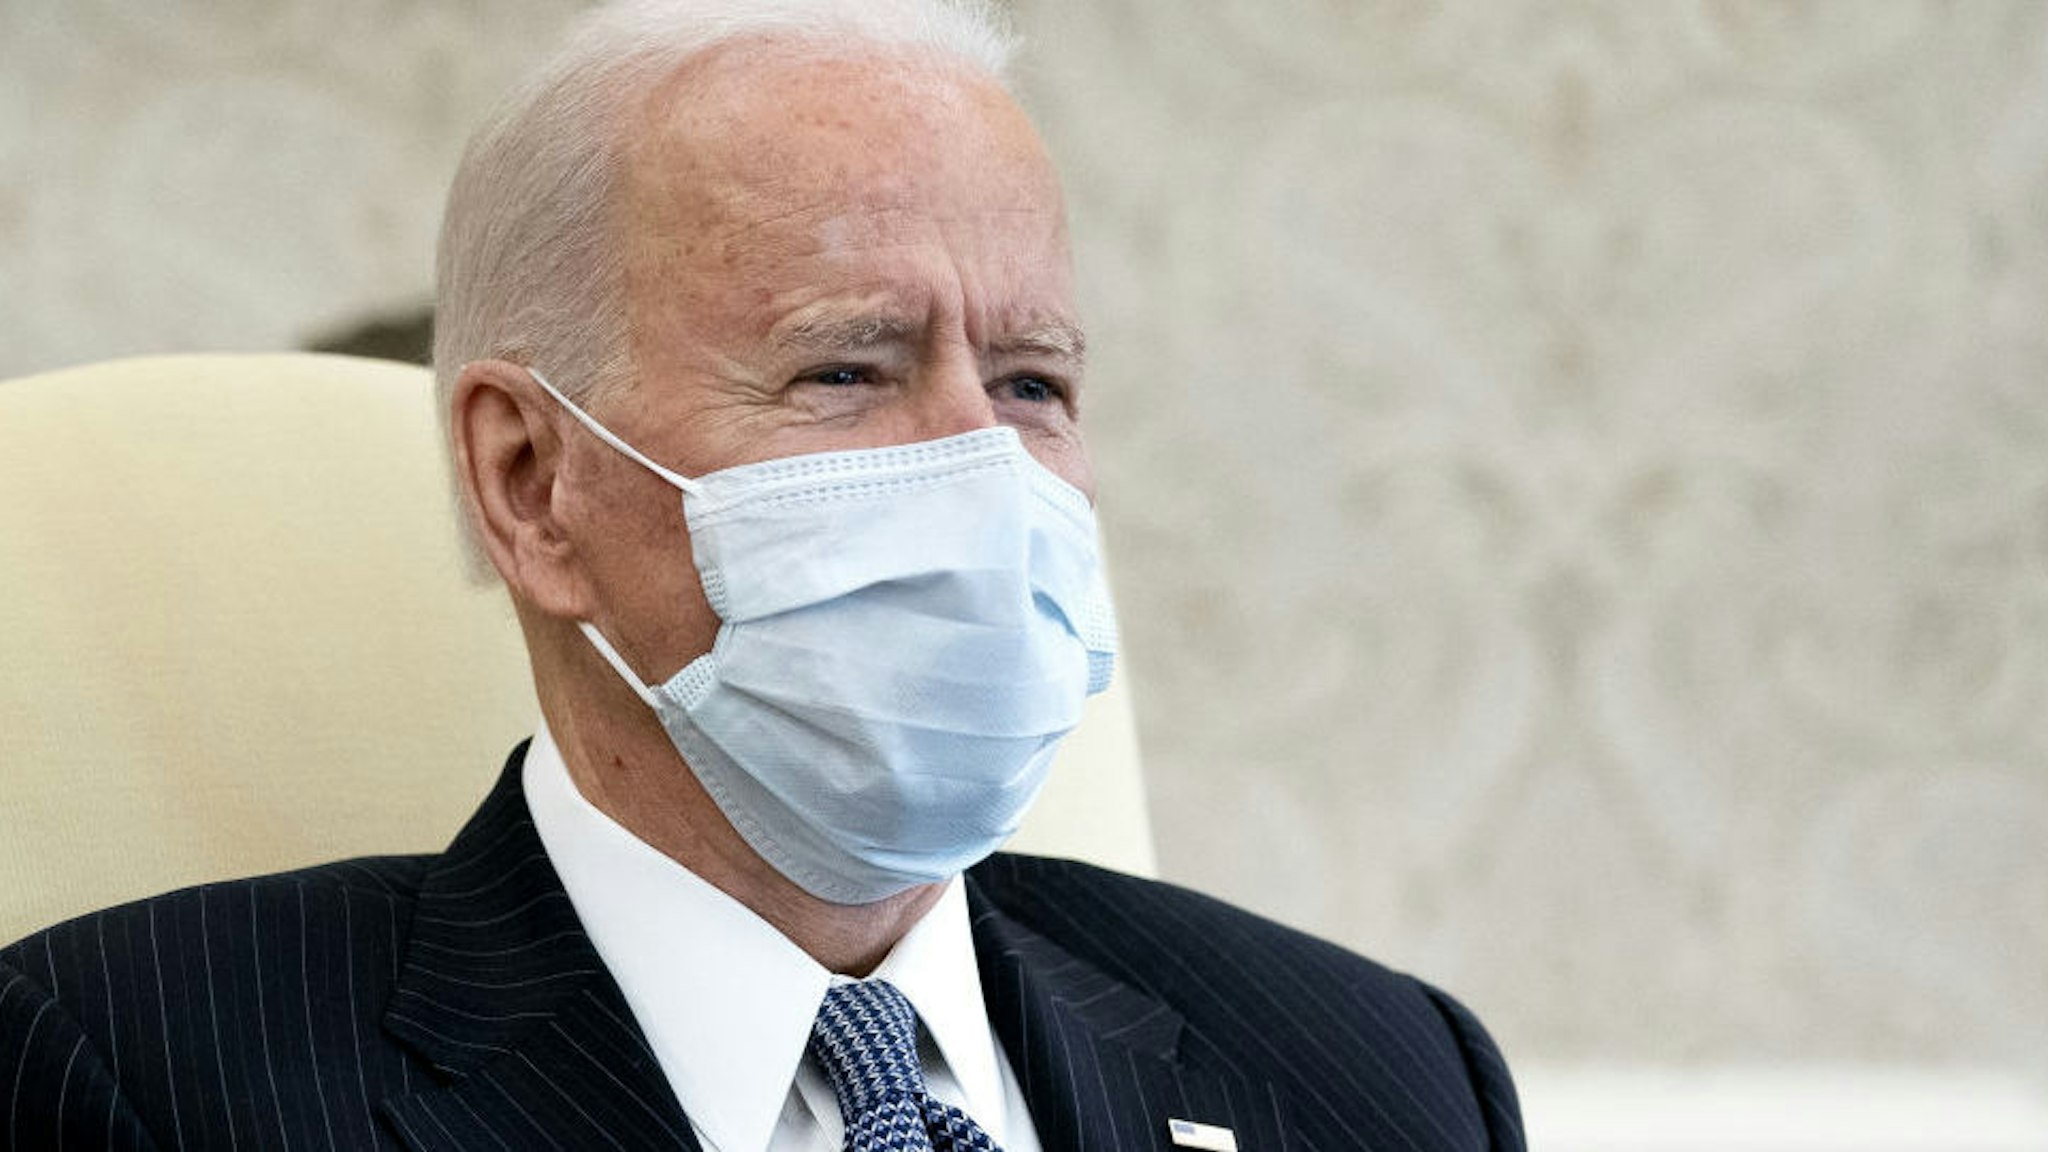 U.S. President Joe Biden wears a protective mask while meeting with Democratic senators in the Oval Office of the White House in Washington, D.C., U.S., on Wednesday, Feb. 3, 2021. The Senate on Tuesday began a process that would let Democrats pass Biden's $1.9 trillion stimulus without Republican votes.